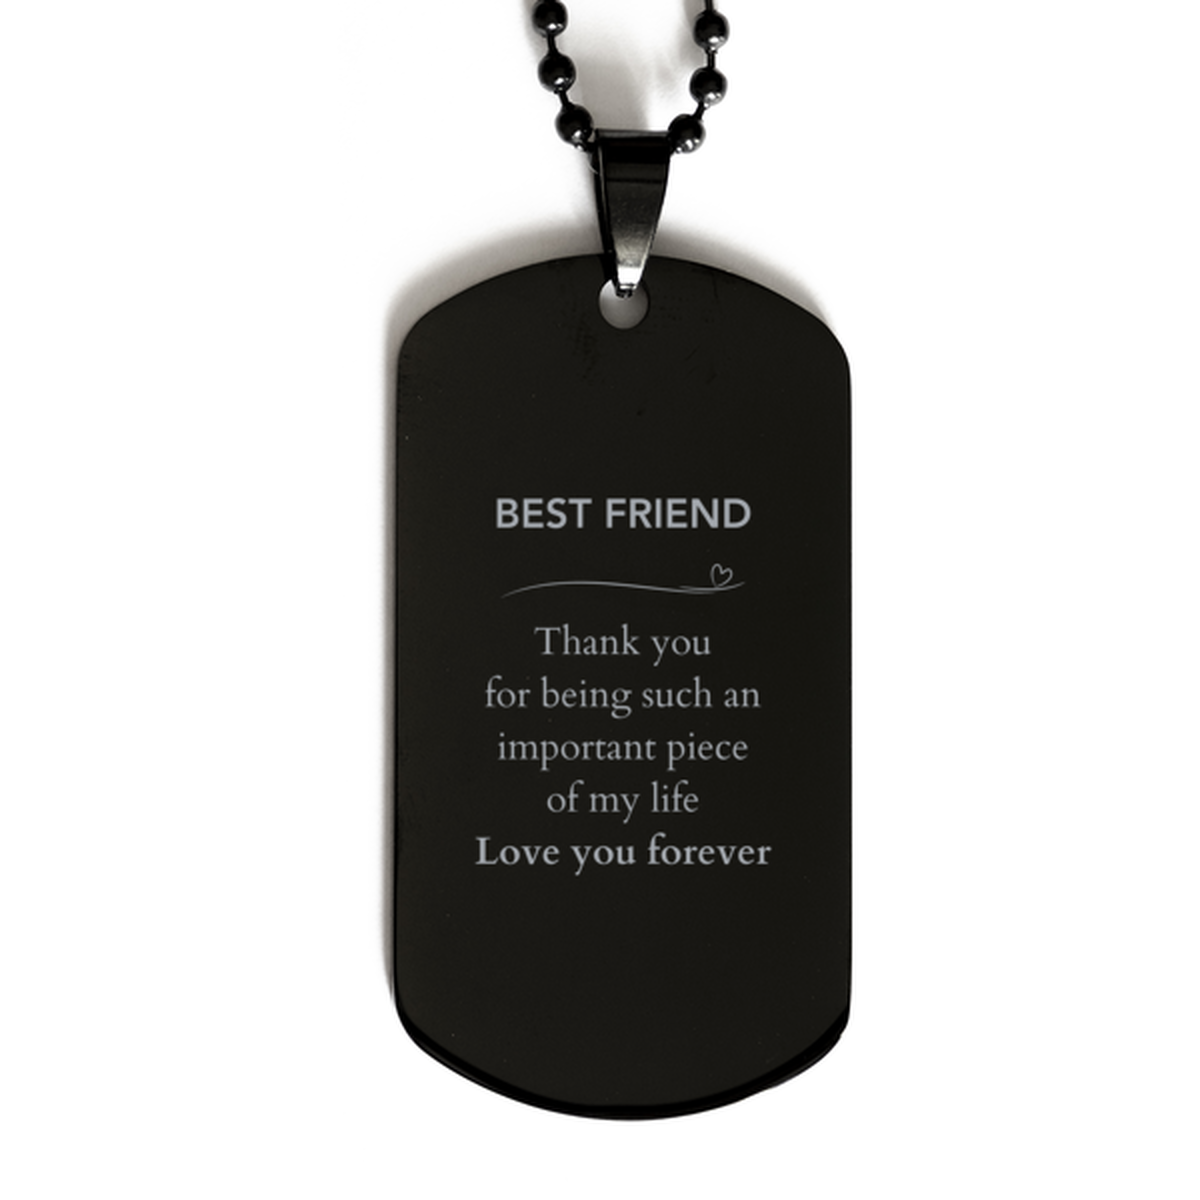 Appropriate Best Friend Black Dog Tag Epic Birthday Gifts for Best Friend Thank you for being such an important piece of my life Best Friend Christmas Mothers Fathers Day